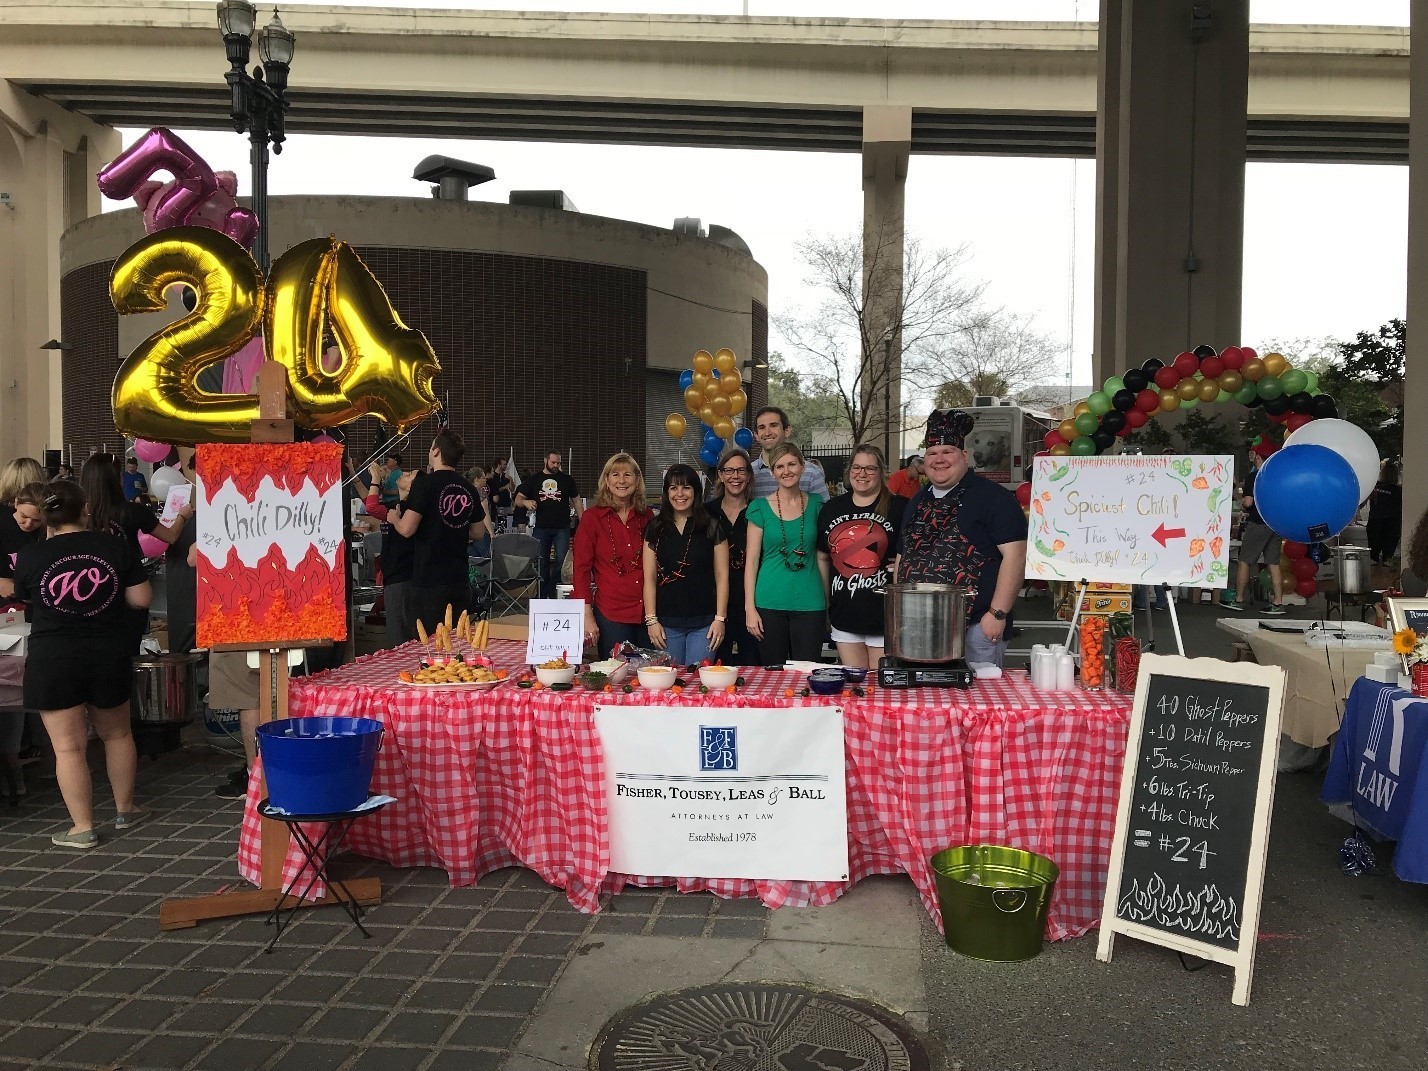 Fisher, Tousey, Leas & Ball took home the Spiciest award in the 2018 Young Lawyers Section Charity Chili Cook-off. The 12th annual Charity Chili Cook-off is Feb. 15 at the Riverside Arts Market.